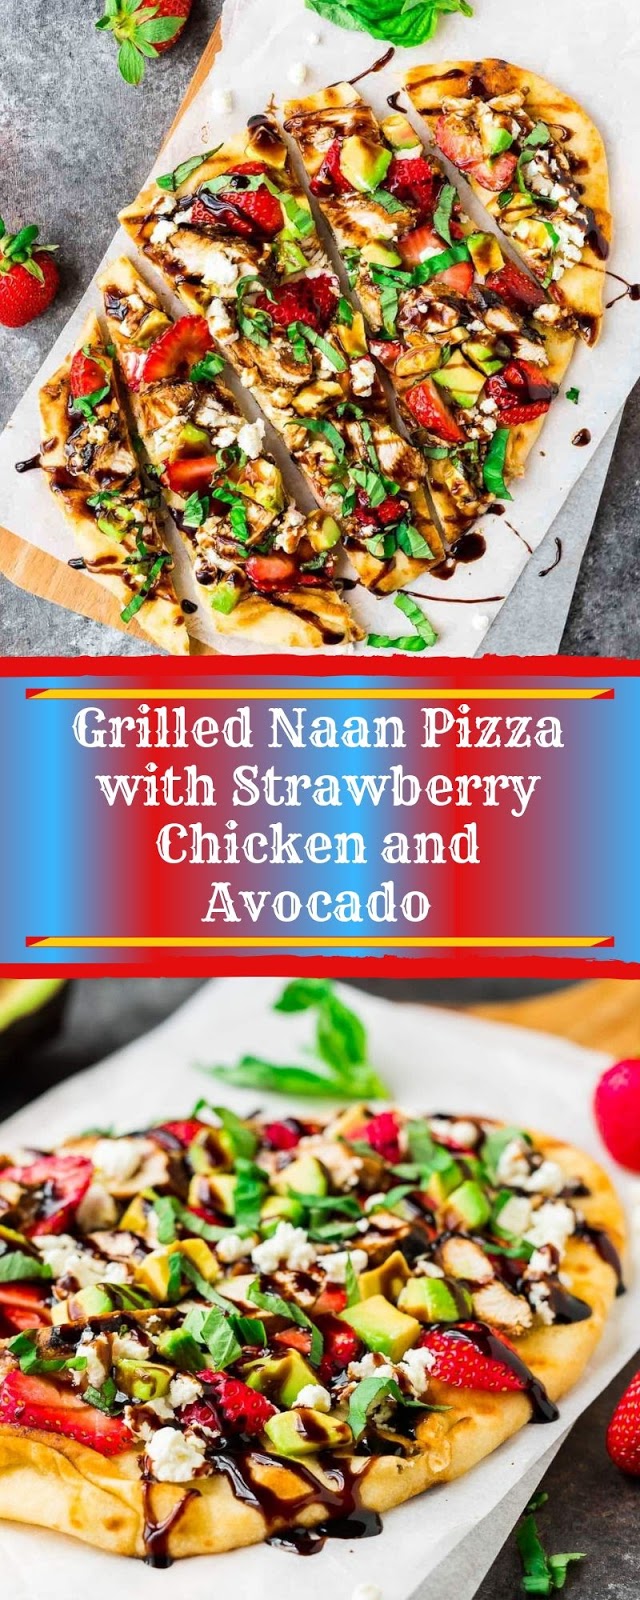 Grilled Naan Pizza with Strawberry Chicken and Avocado